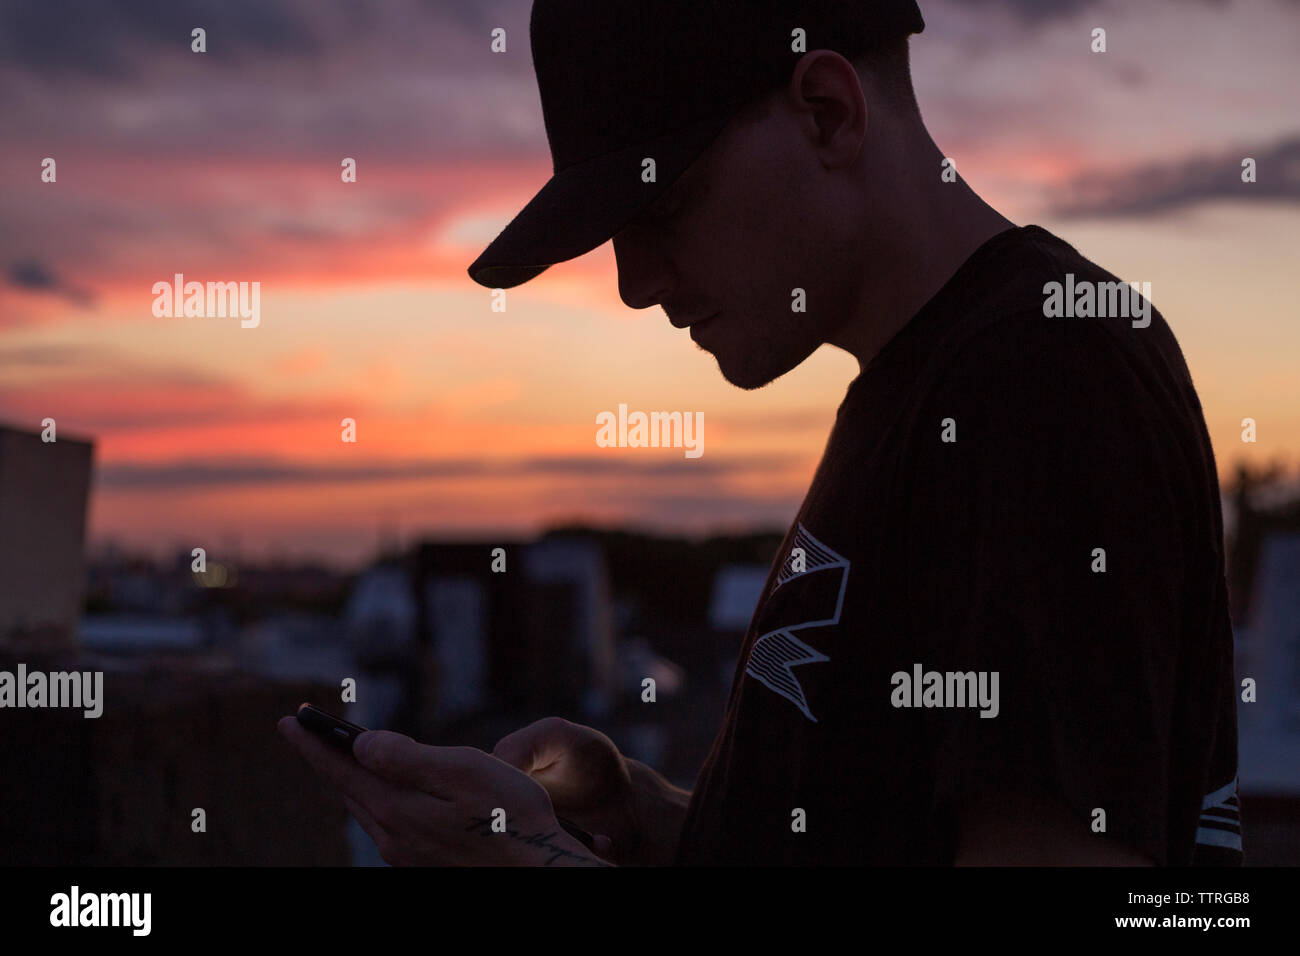 Close-up of silhouette man wearing cap Stock Photo